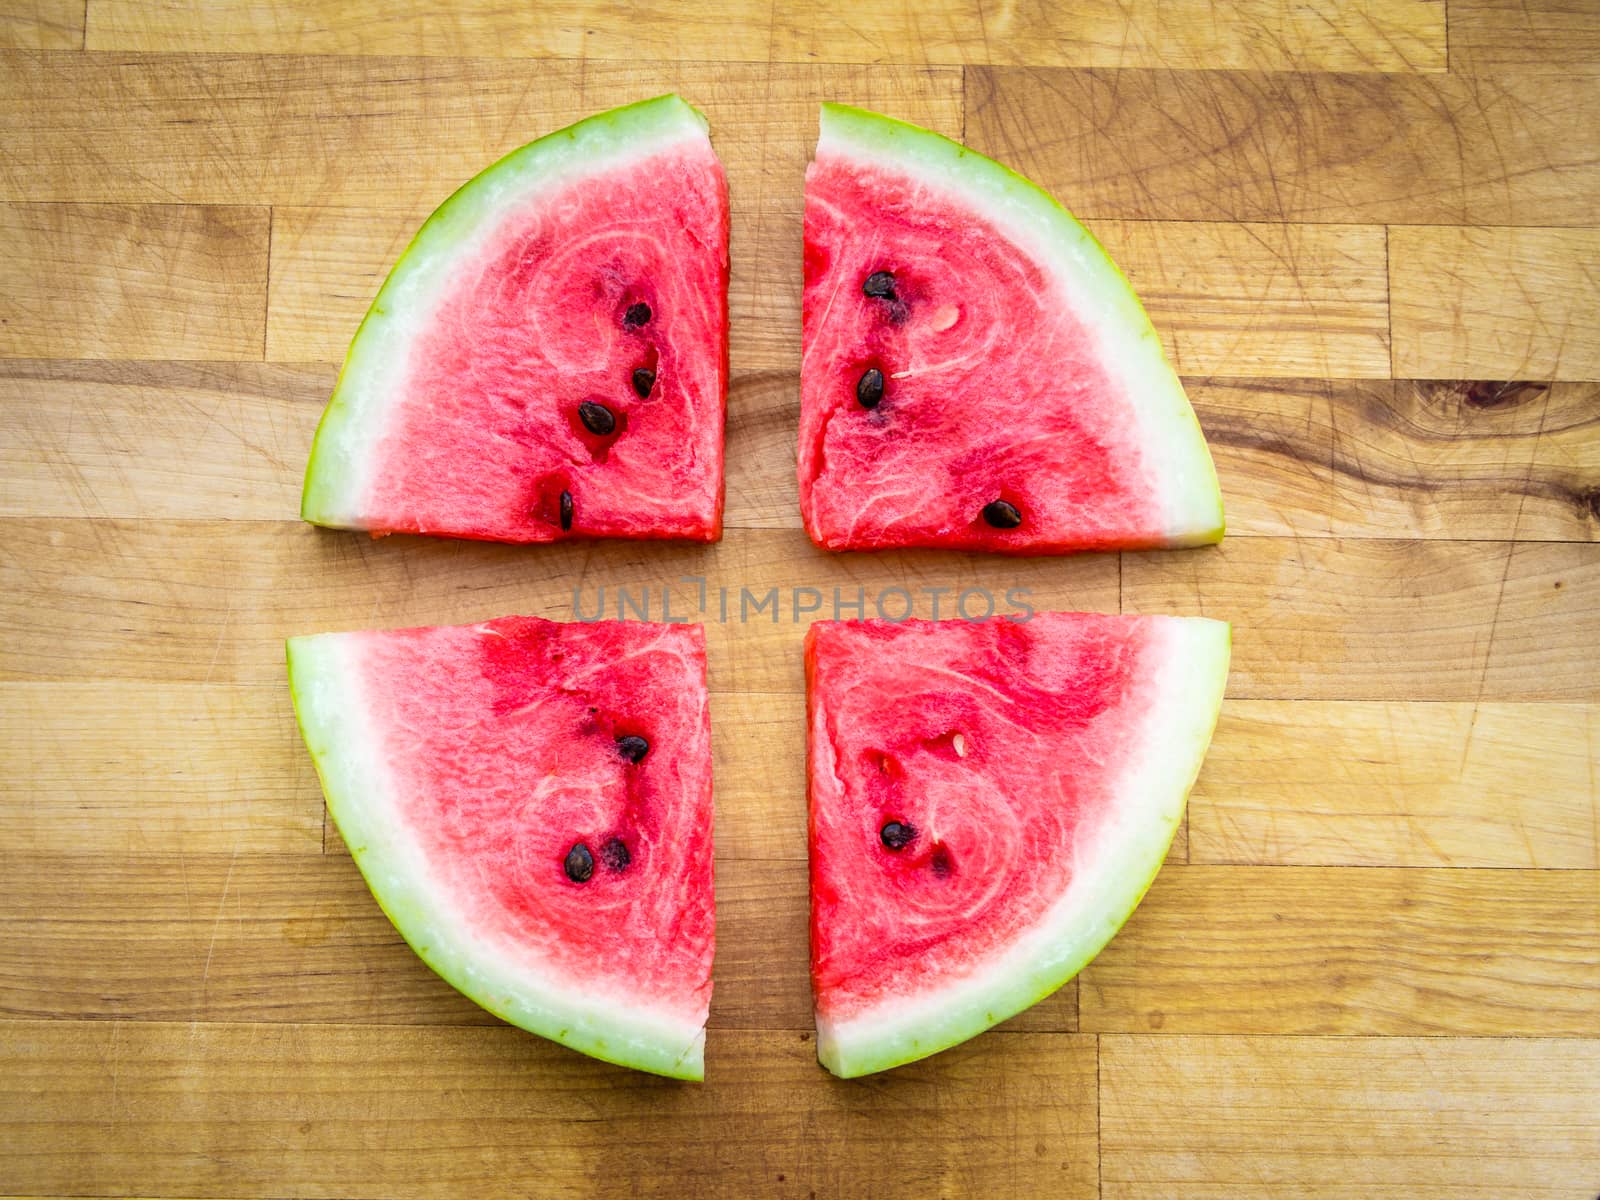 Watermelon slices arranged in a circle shape by weruskak